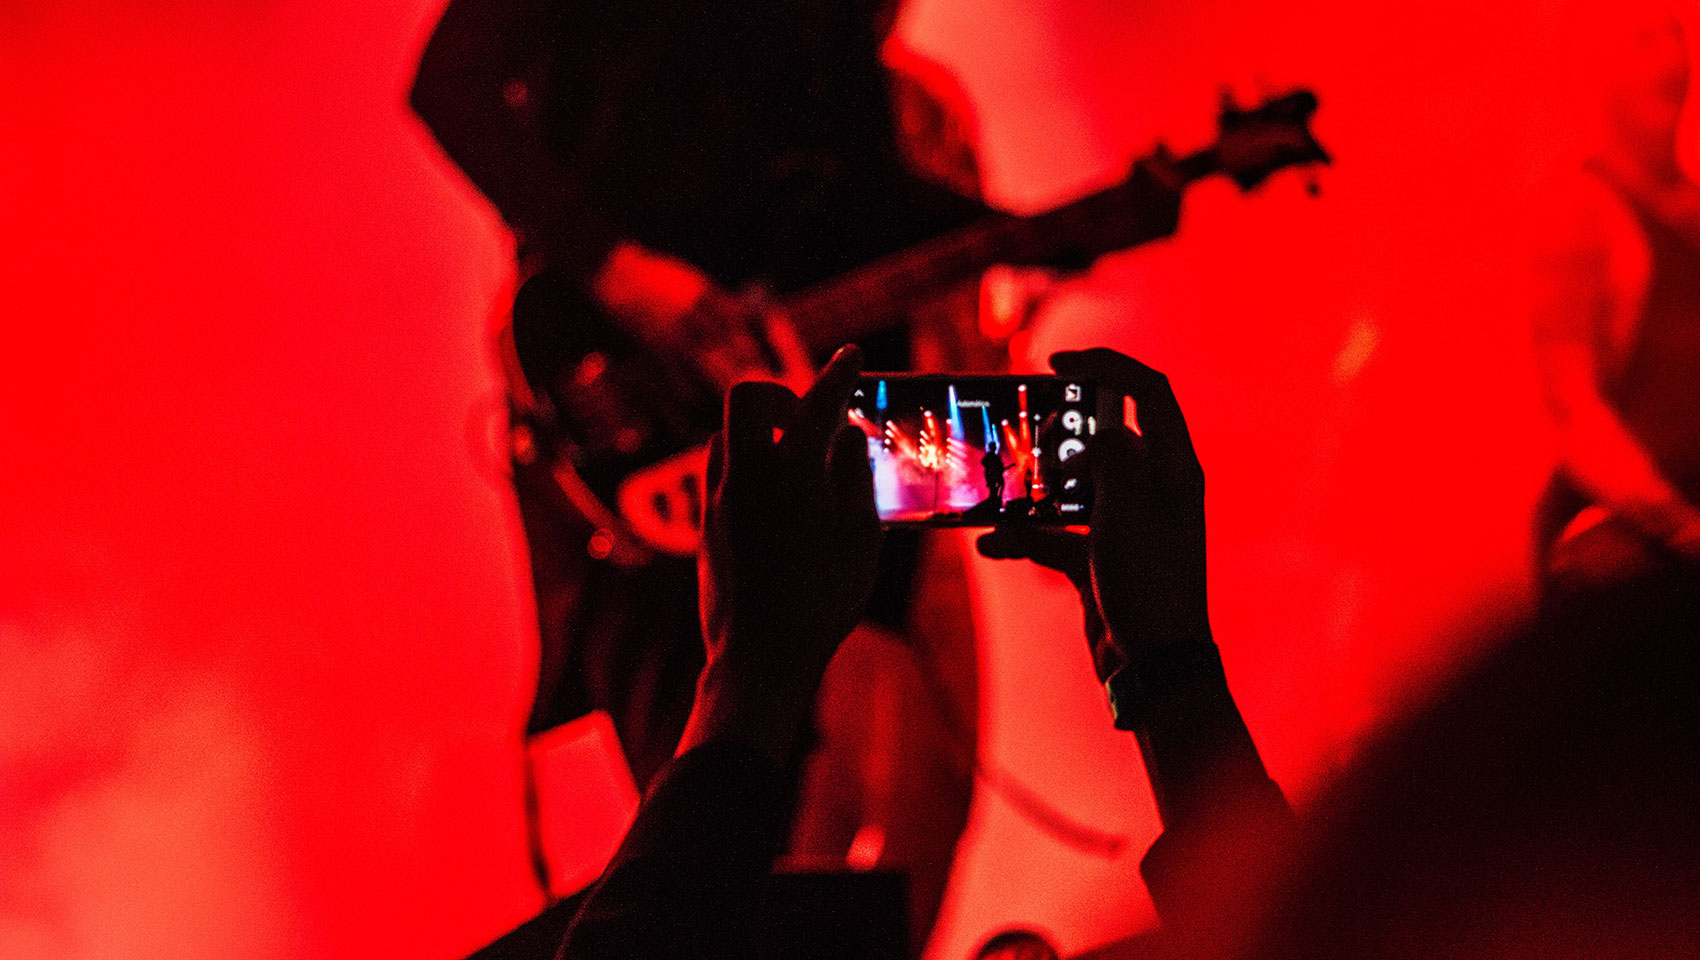 Concertgoer holding up phone to record the show